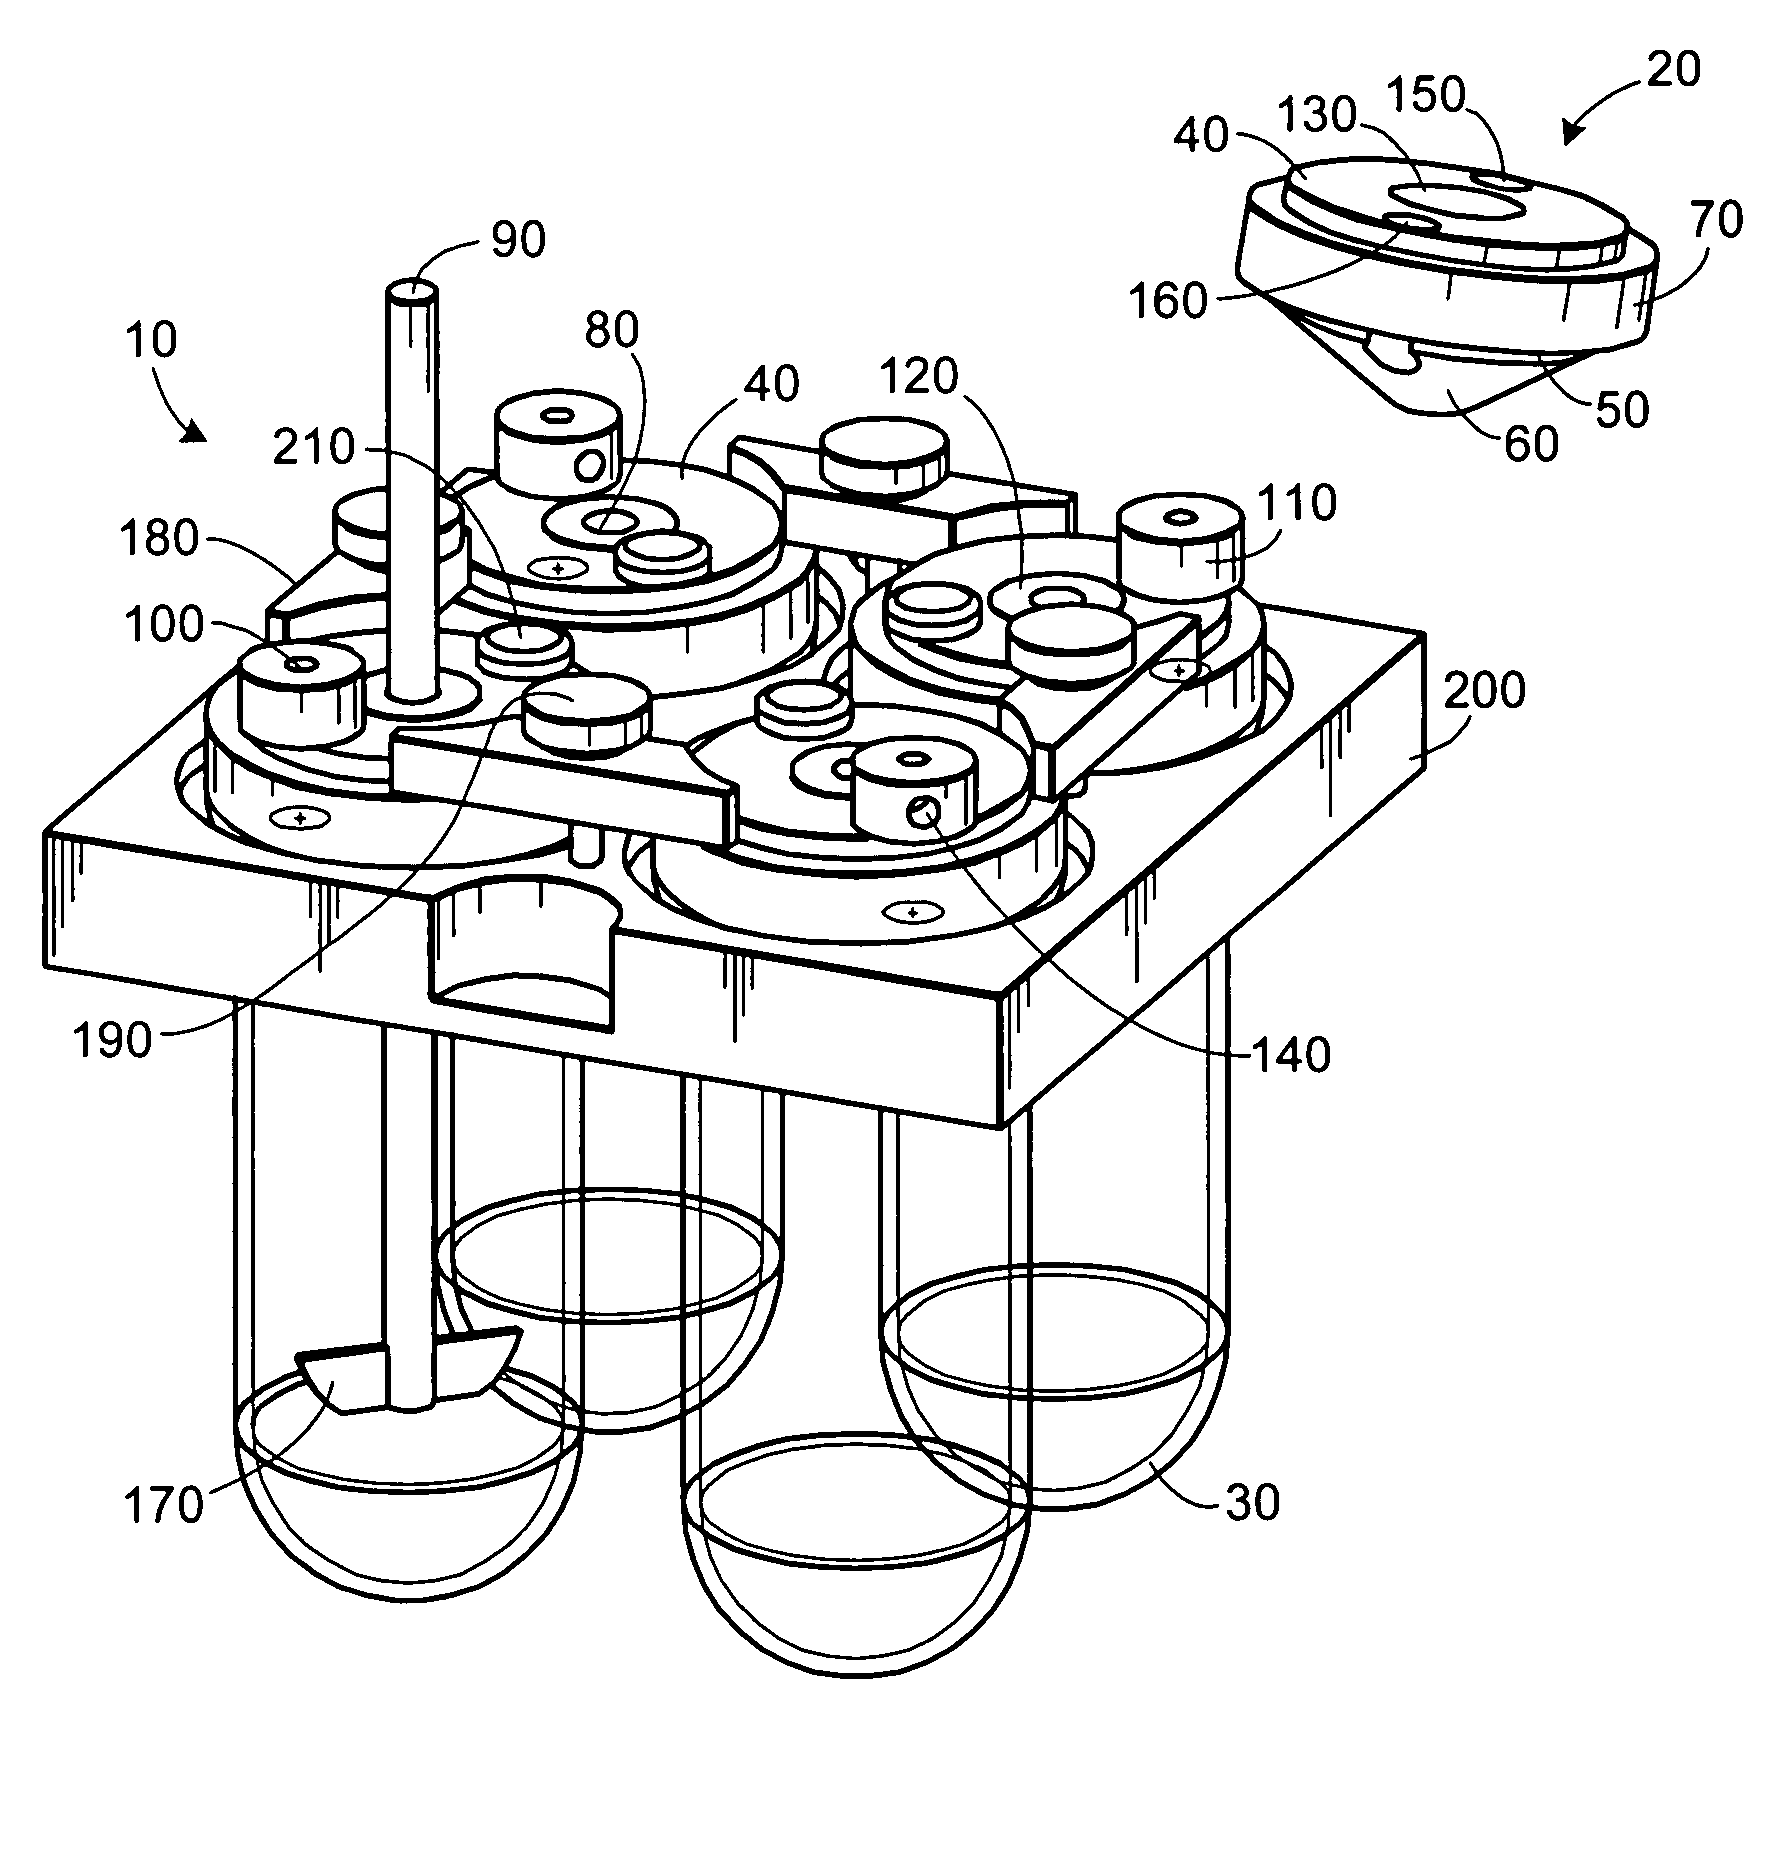 Apparatuses and media for drug elution and methods for making and using them